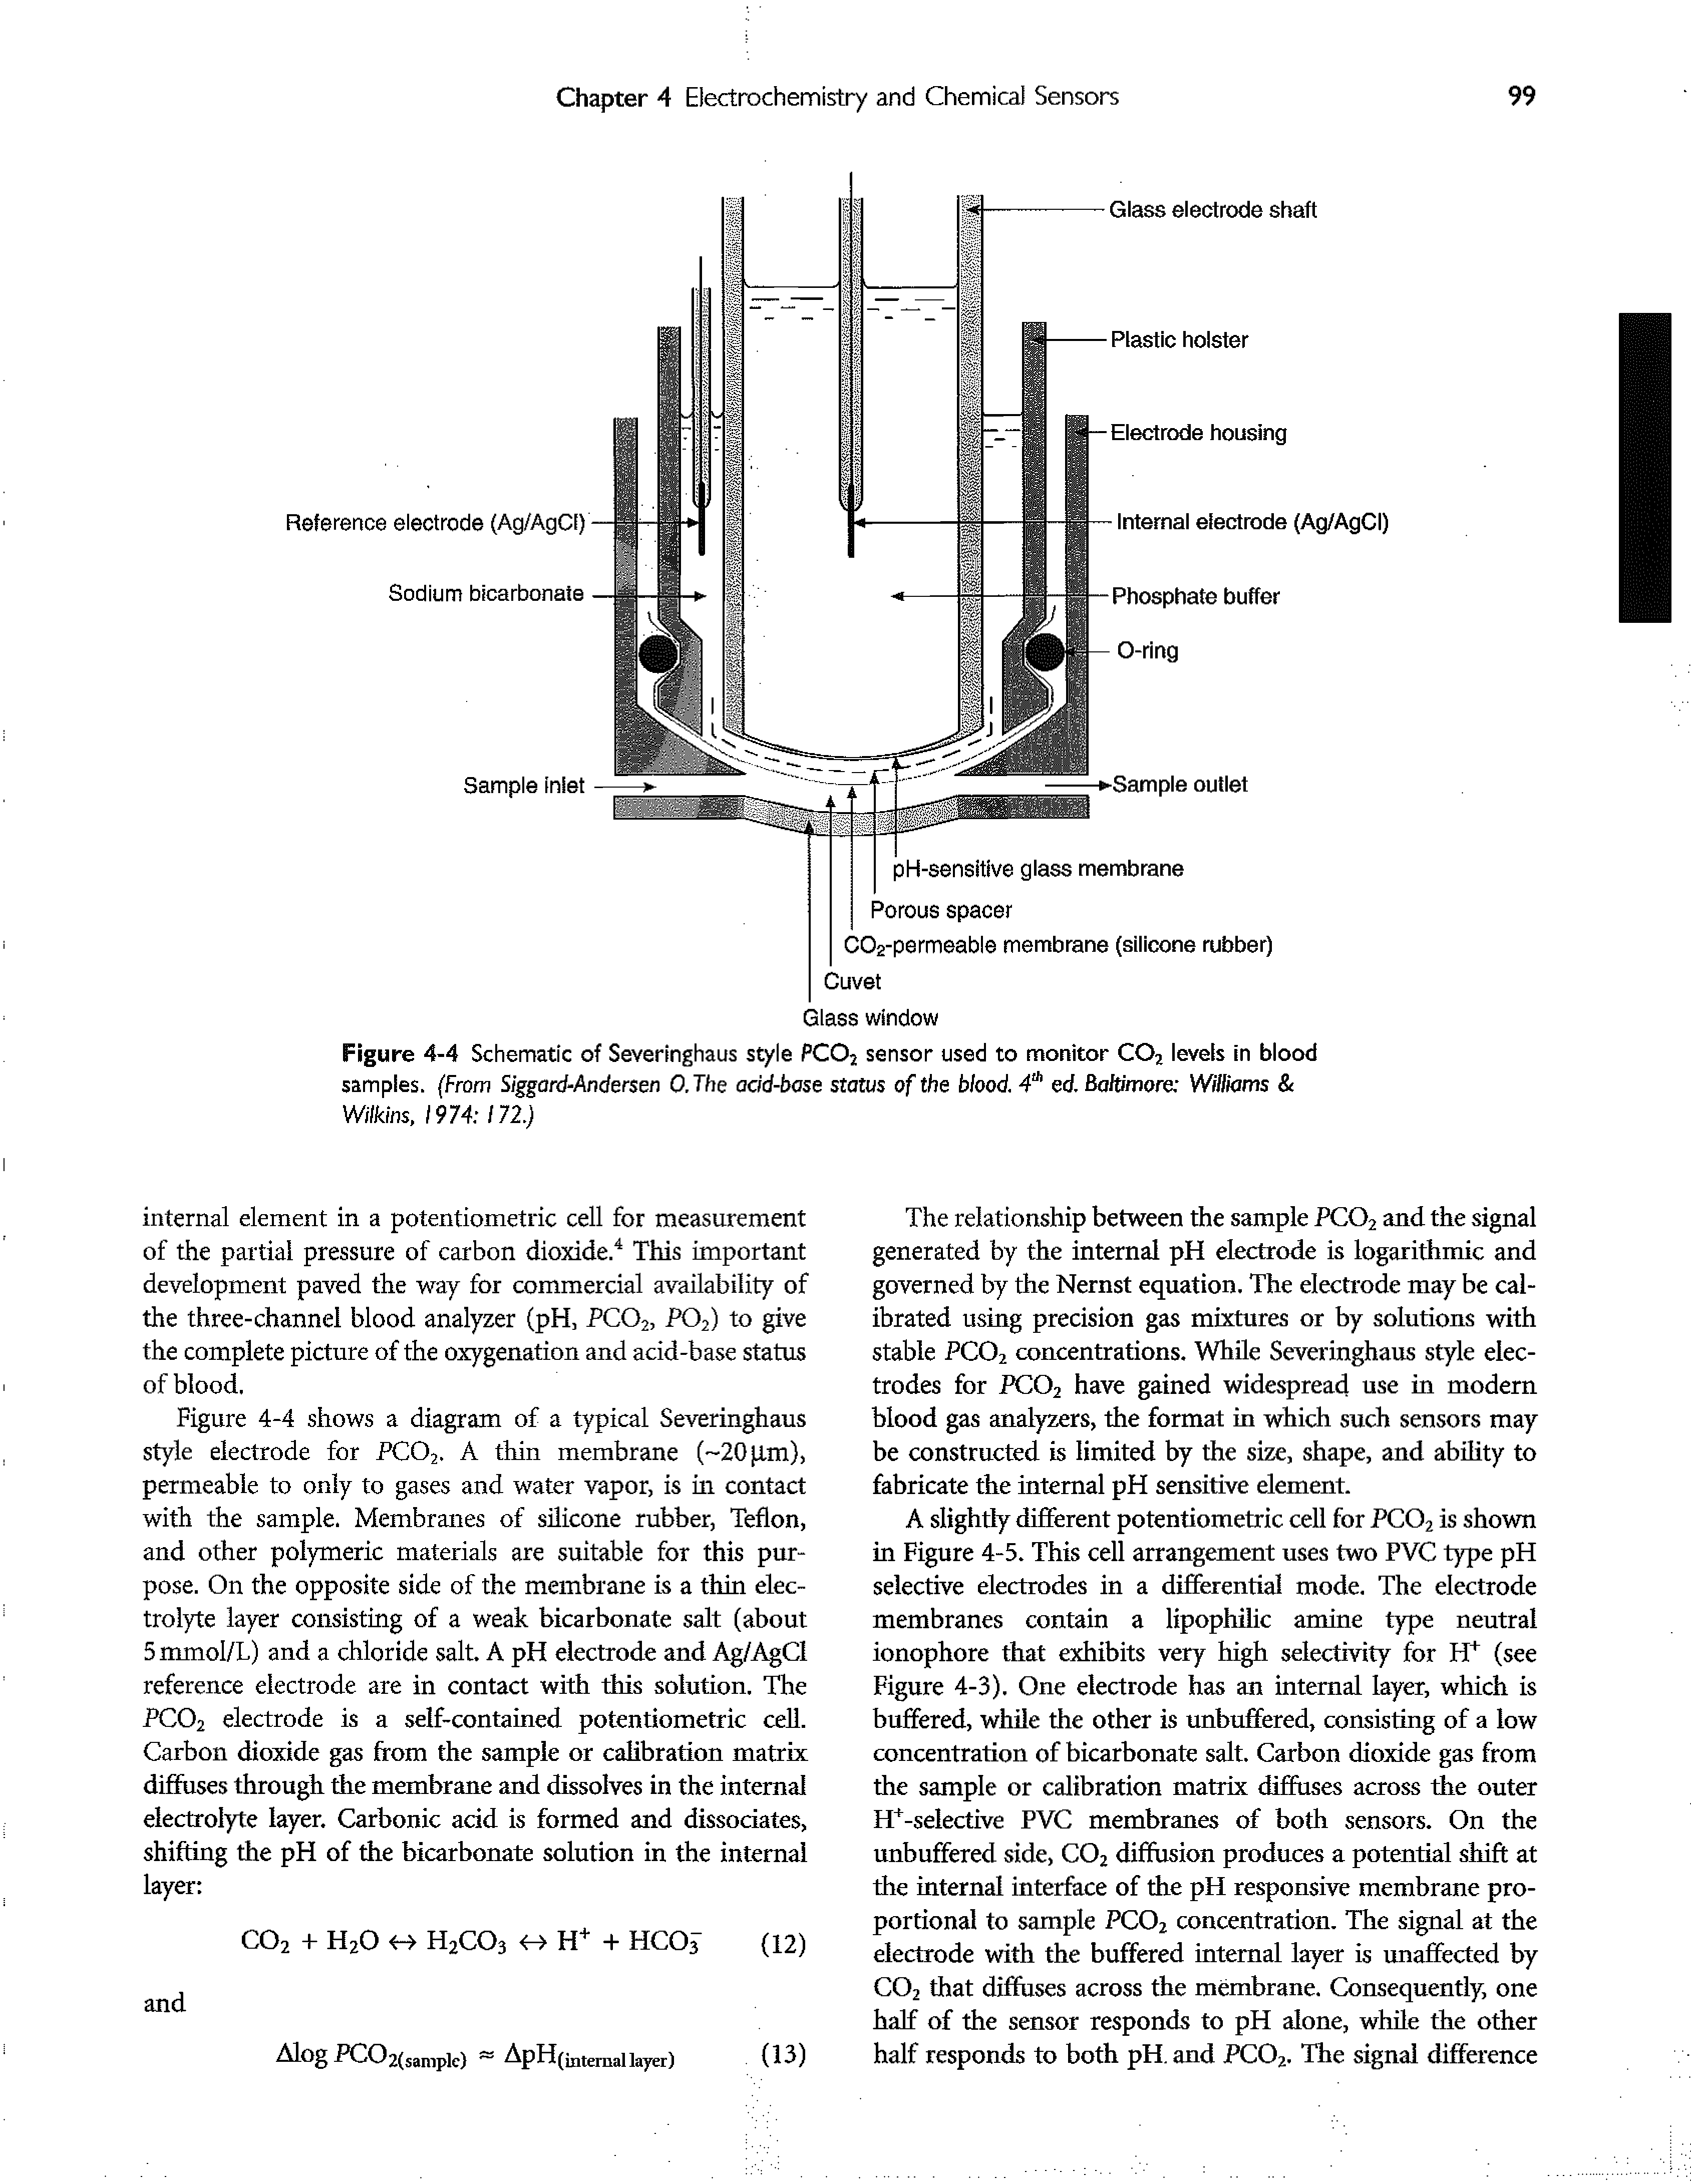 Figure 4-4 Schematic of Severinghaus style PCO sensor used to monitor CO2 levels in blood samples. (From S/ggard-Andersen O.Tfie add-base status of the blood. 4" ed. Eialtimore Williams Wilkins, 1974 172.)...